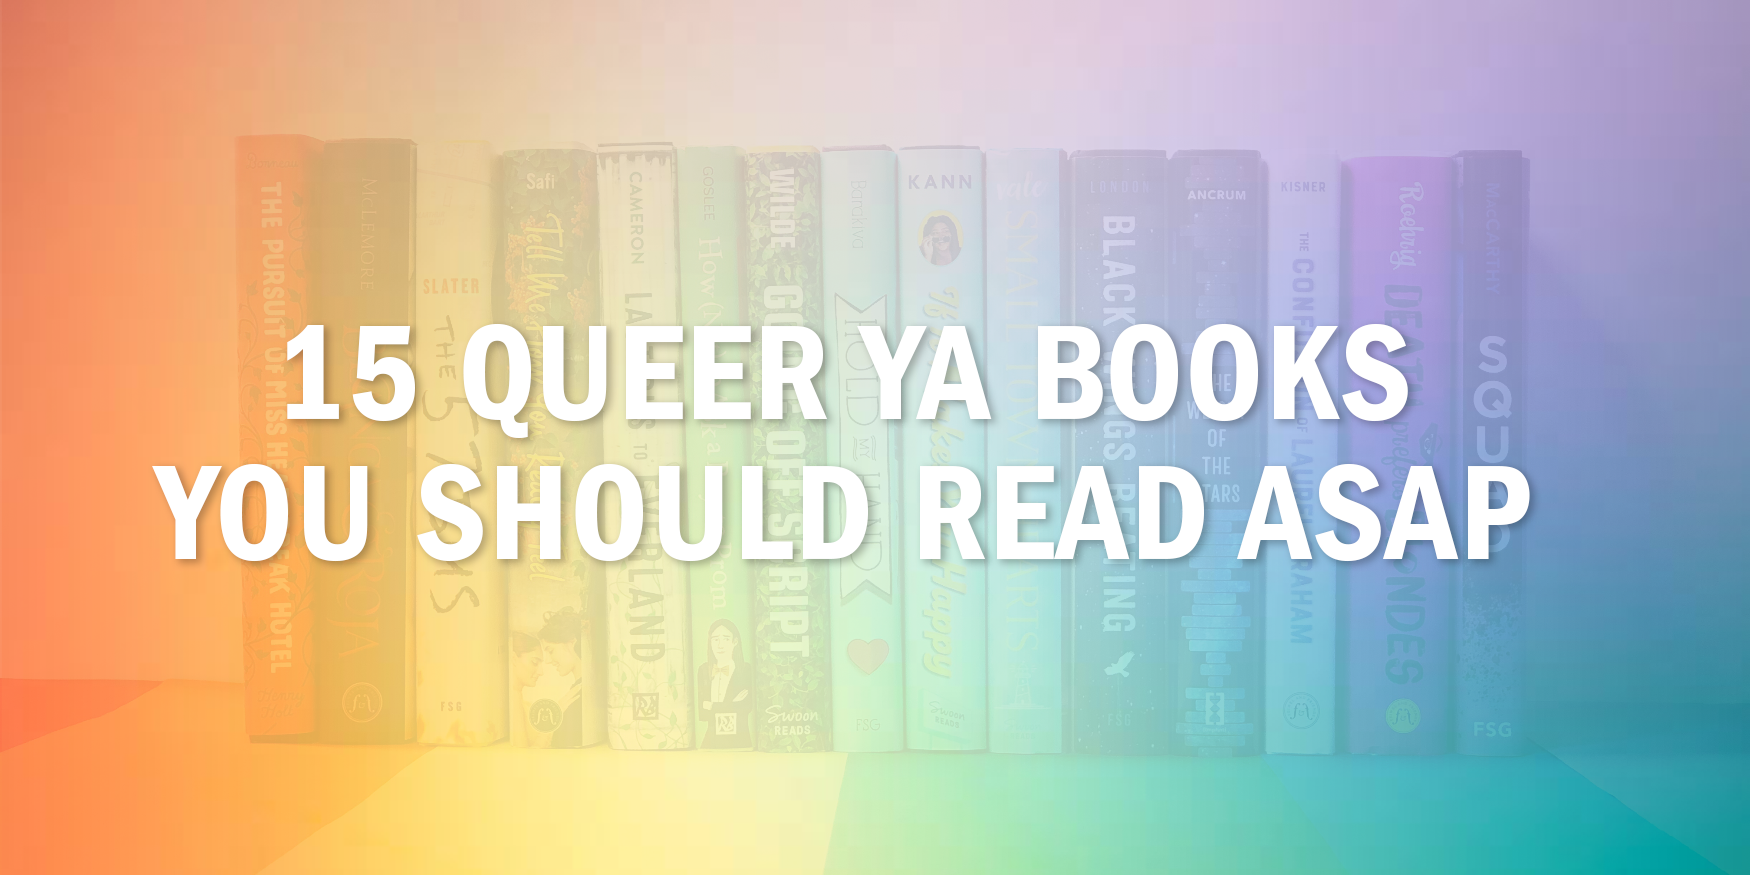 15 Queer YA Books You Should Read ASAP